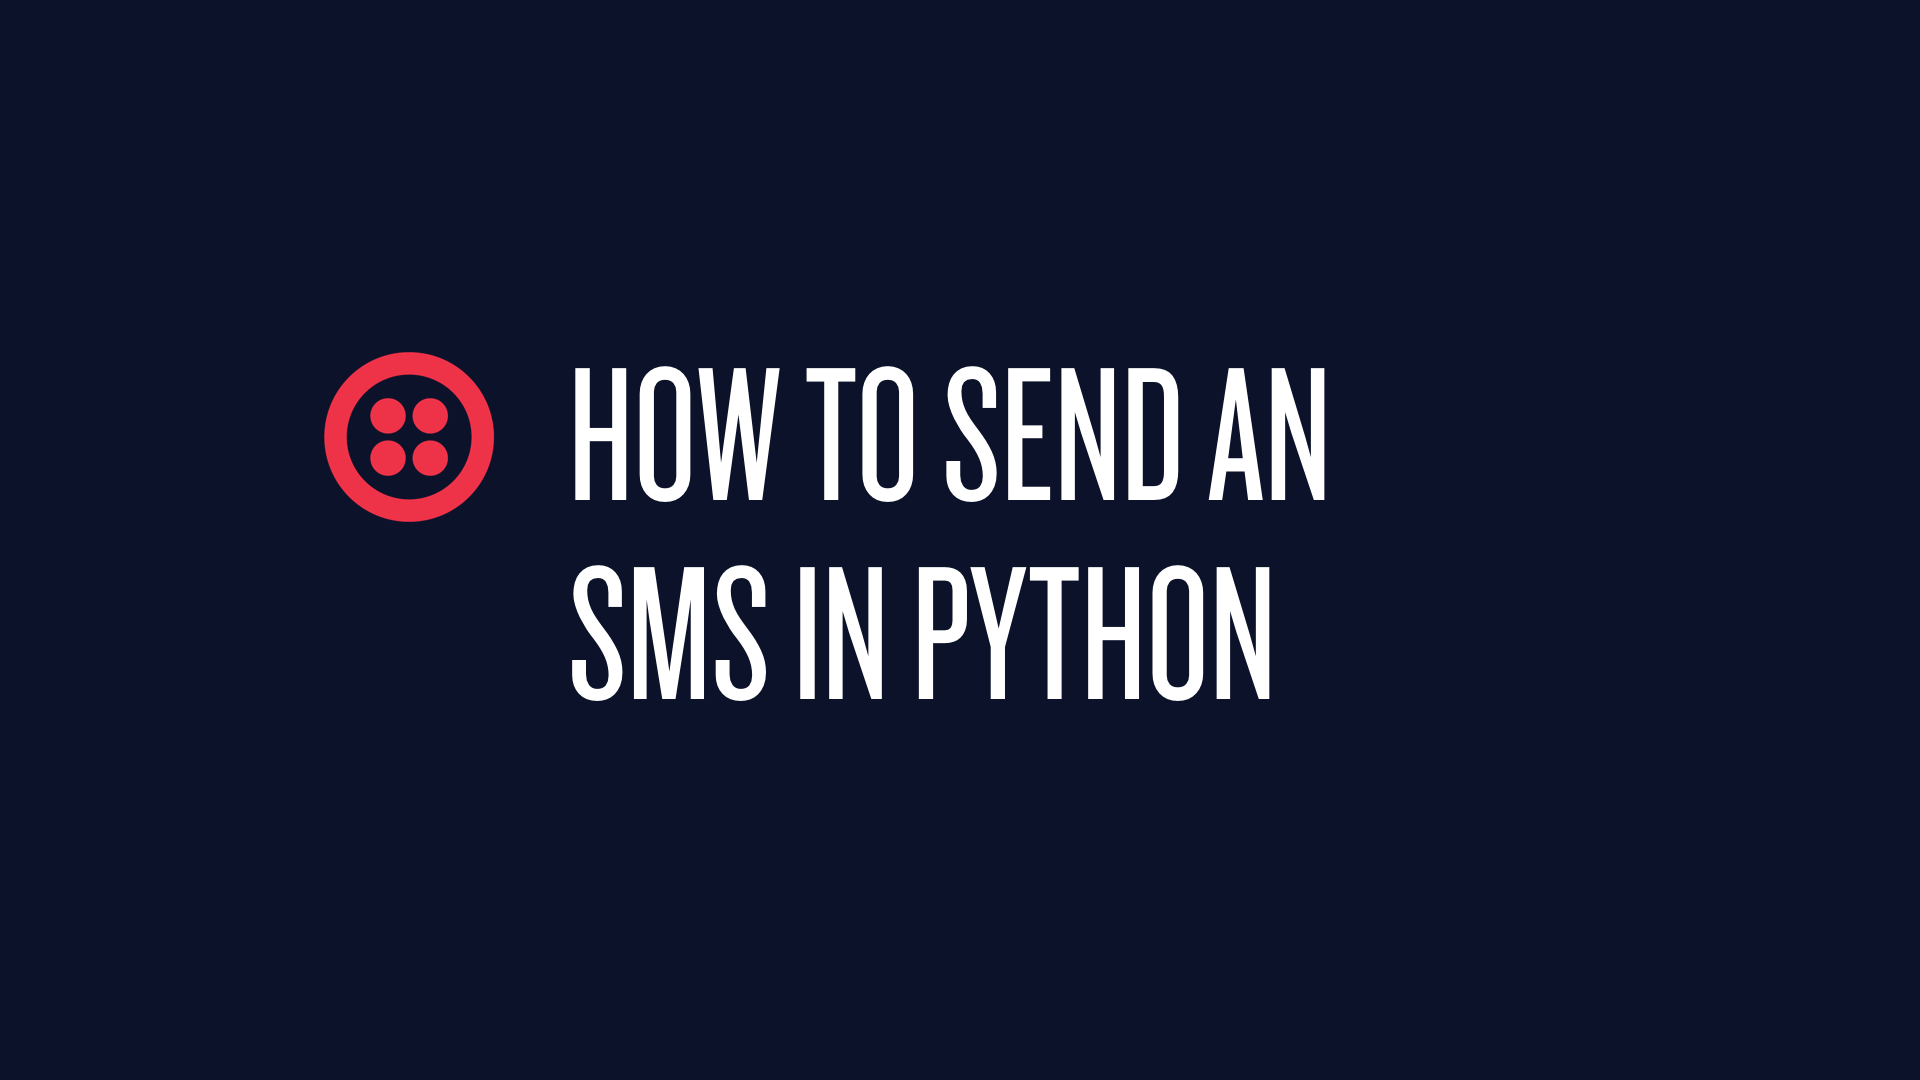 How to send an SMS in Python